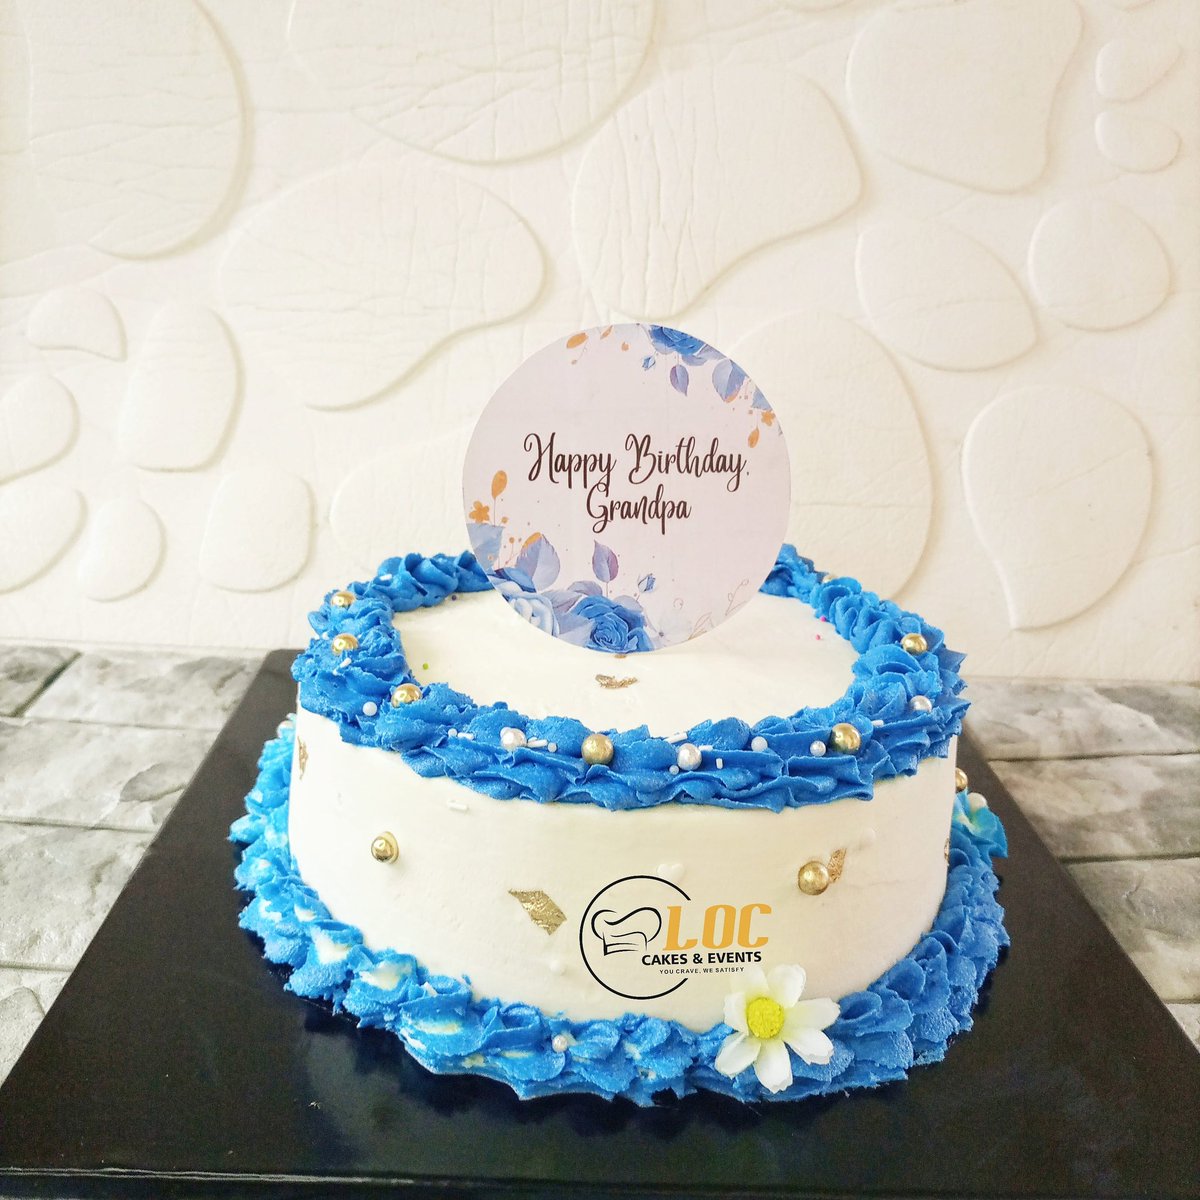 Frame 1: Mini Banana Bread Frame 2: Midi Banana Bread Frame 3: Milky Doughnuts and foil cake Frame 4: '8 Budget cake Please send us a message at least a day before delivery date. We do not offer same-day delivery. Pls RT when this pops on your TL @HafeezAkanni_ @Uzzyokeke